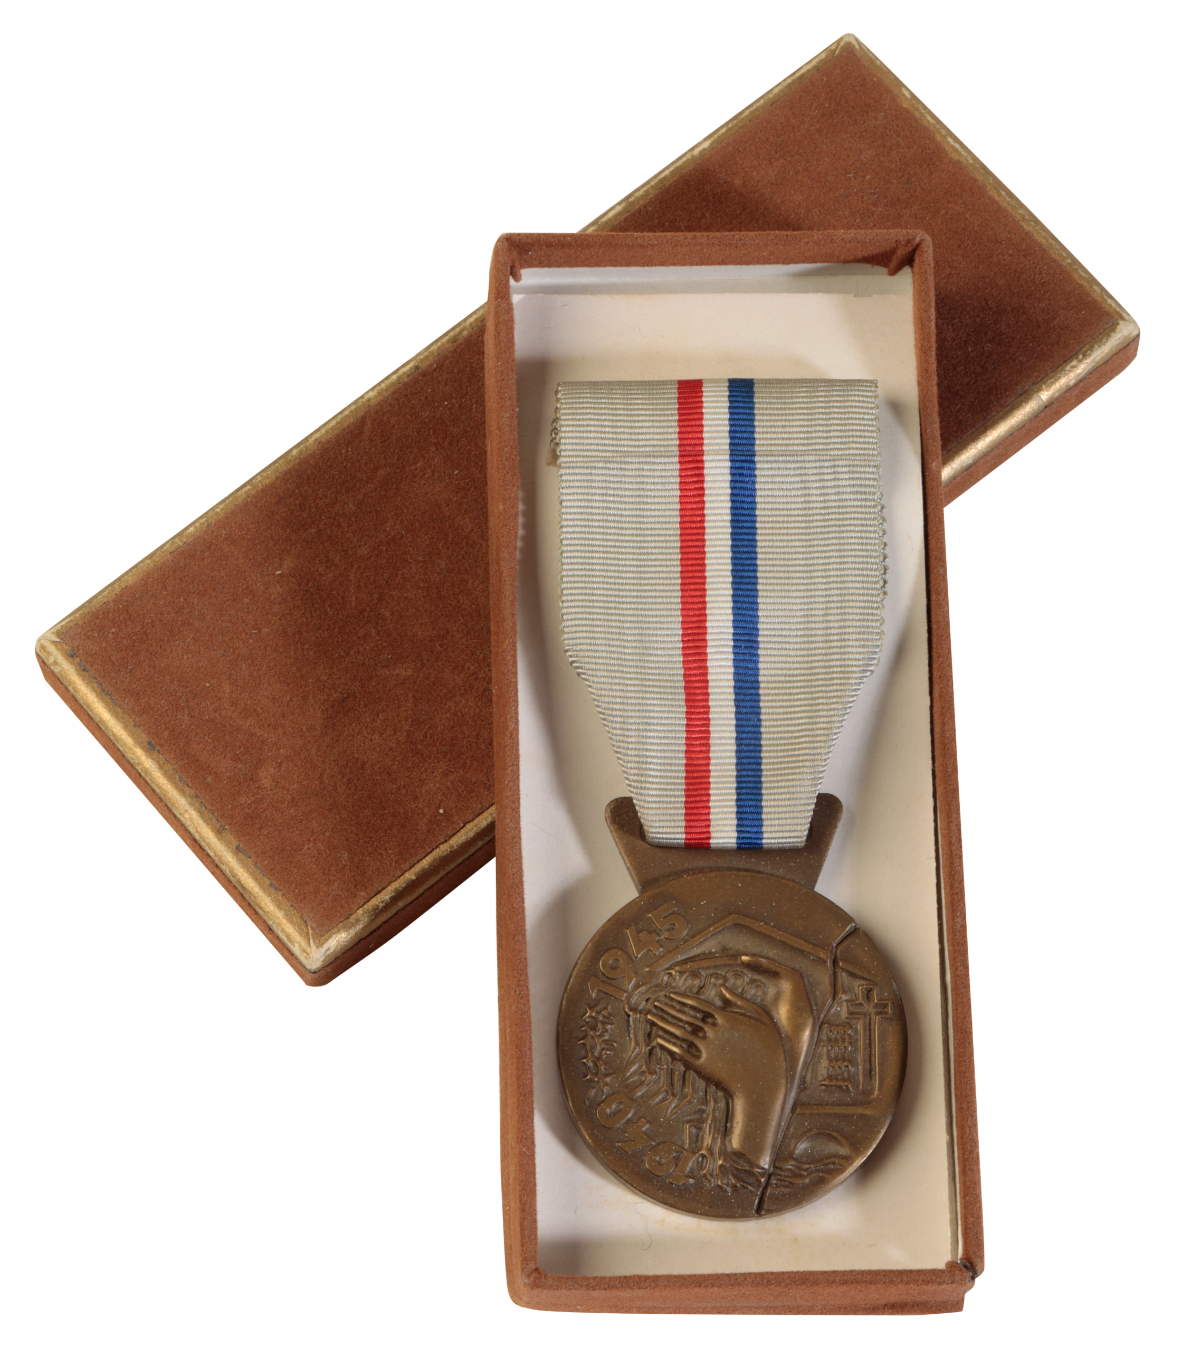 LUXEMBOURG. MEDAL OF NATIONAL RECOGNITION